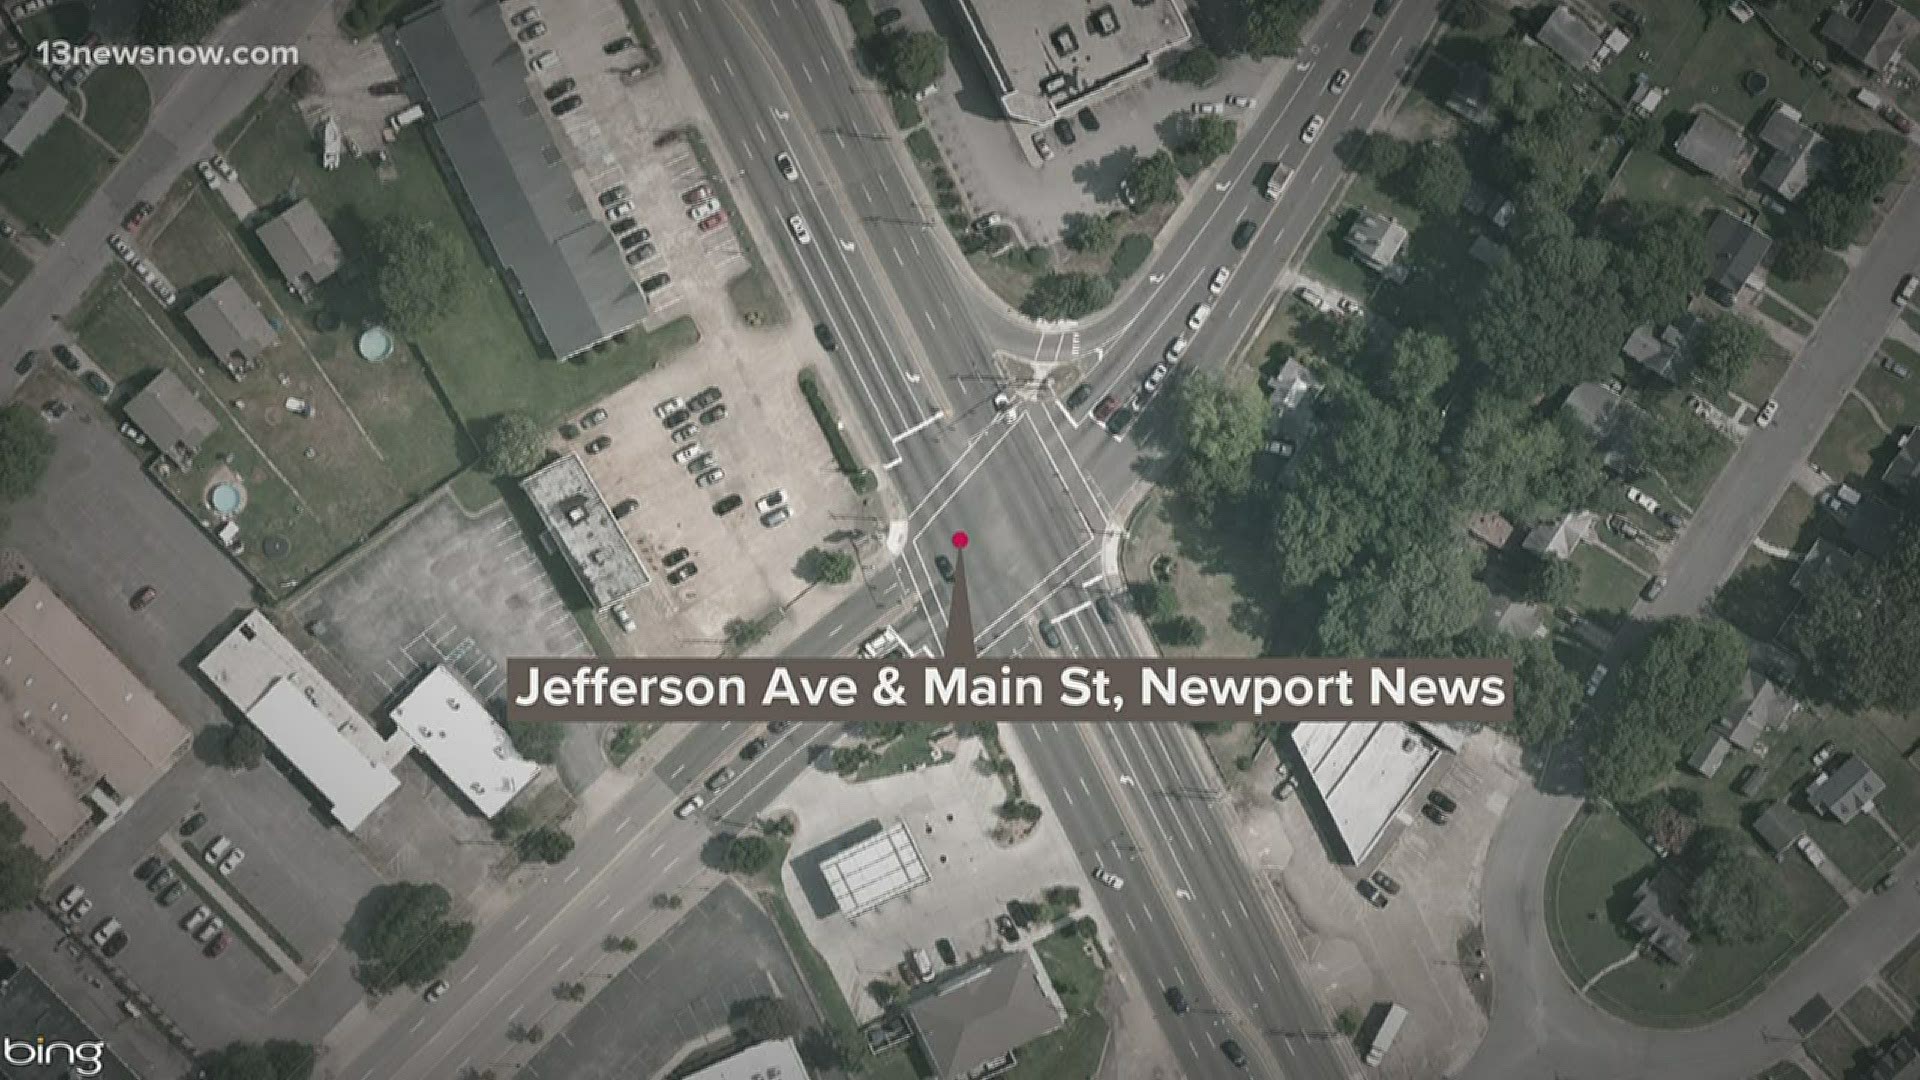 The fatal wreck happened at the intersection of Jefferson Avenue and Main Street.